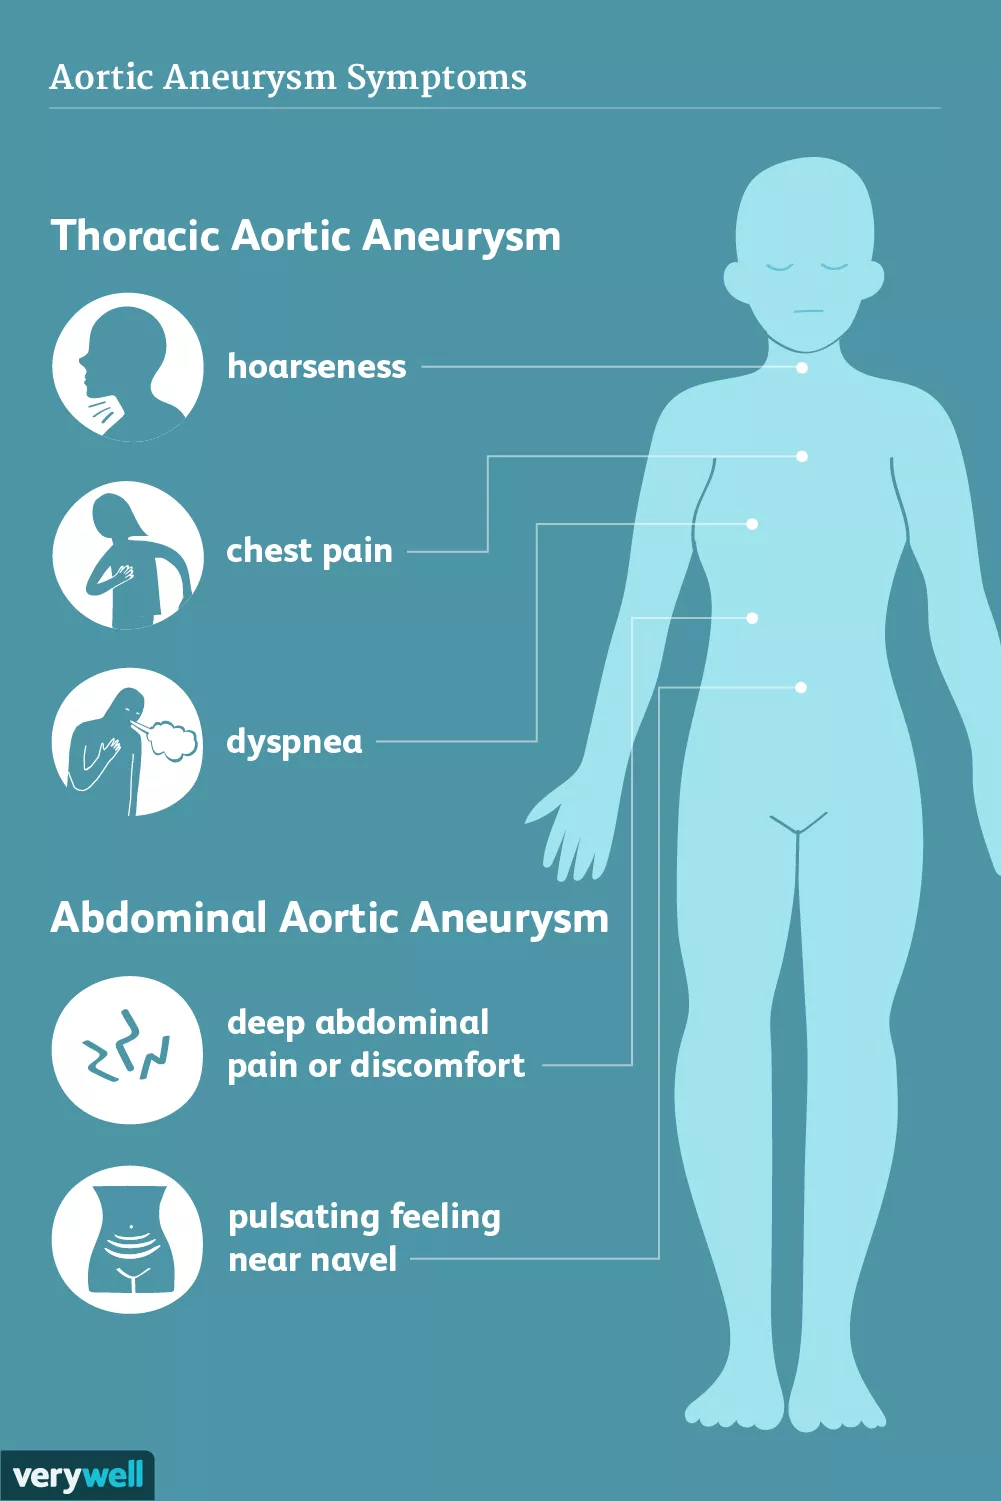 Symptoms and Complications of Aortic Aneurysm